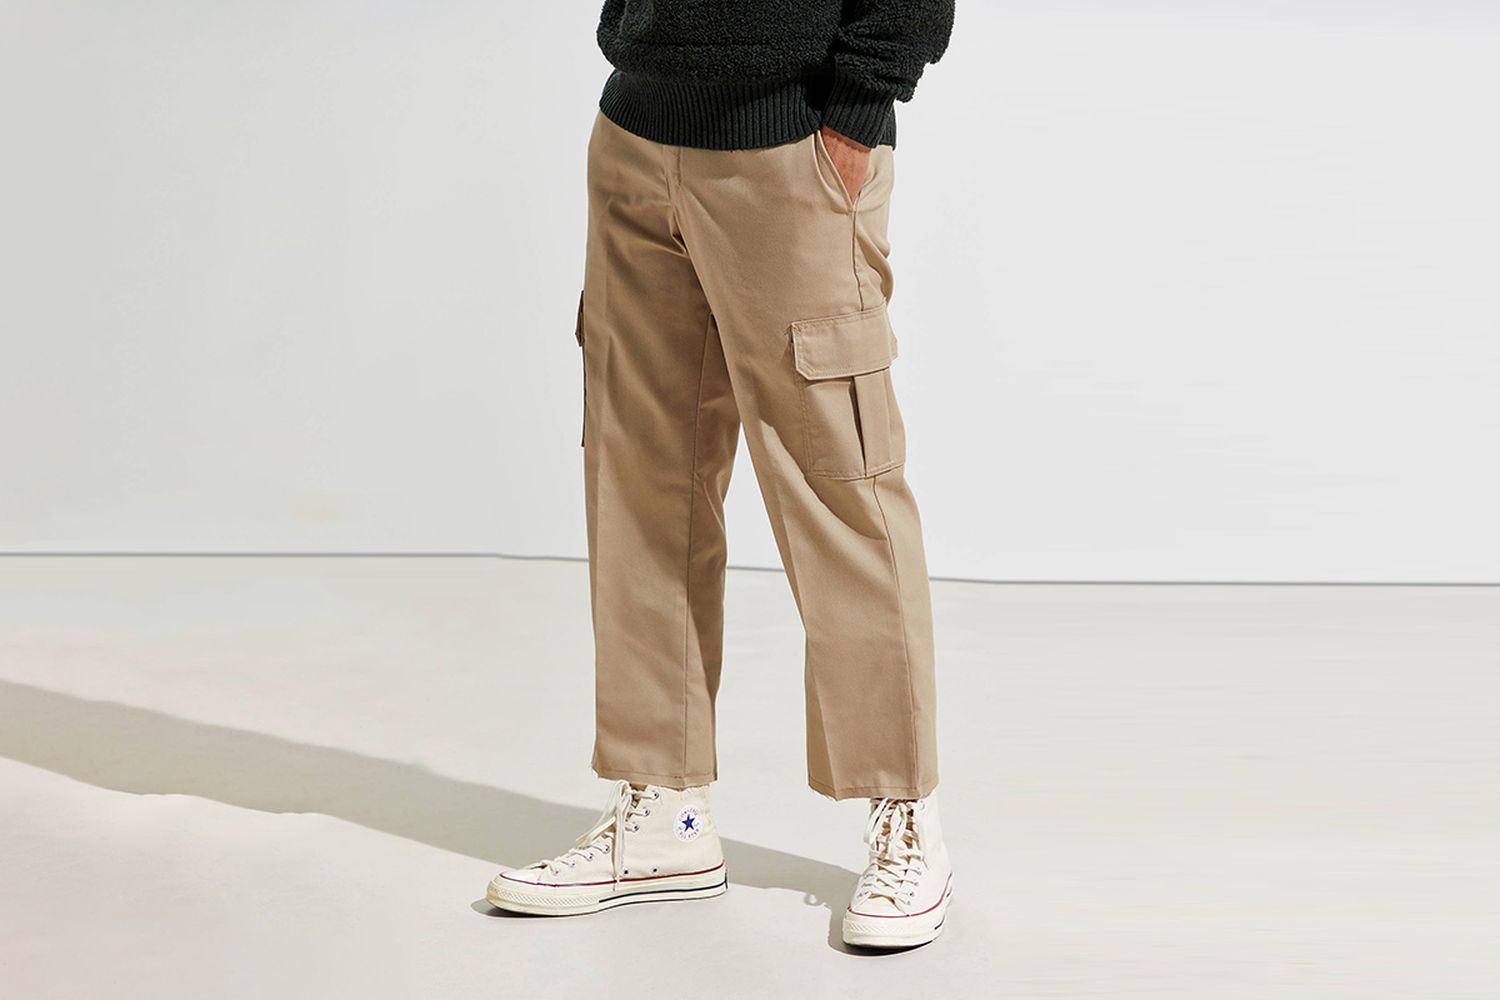 10 Affordable Dickies Essentials to Shop at Urban Outfitters